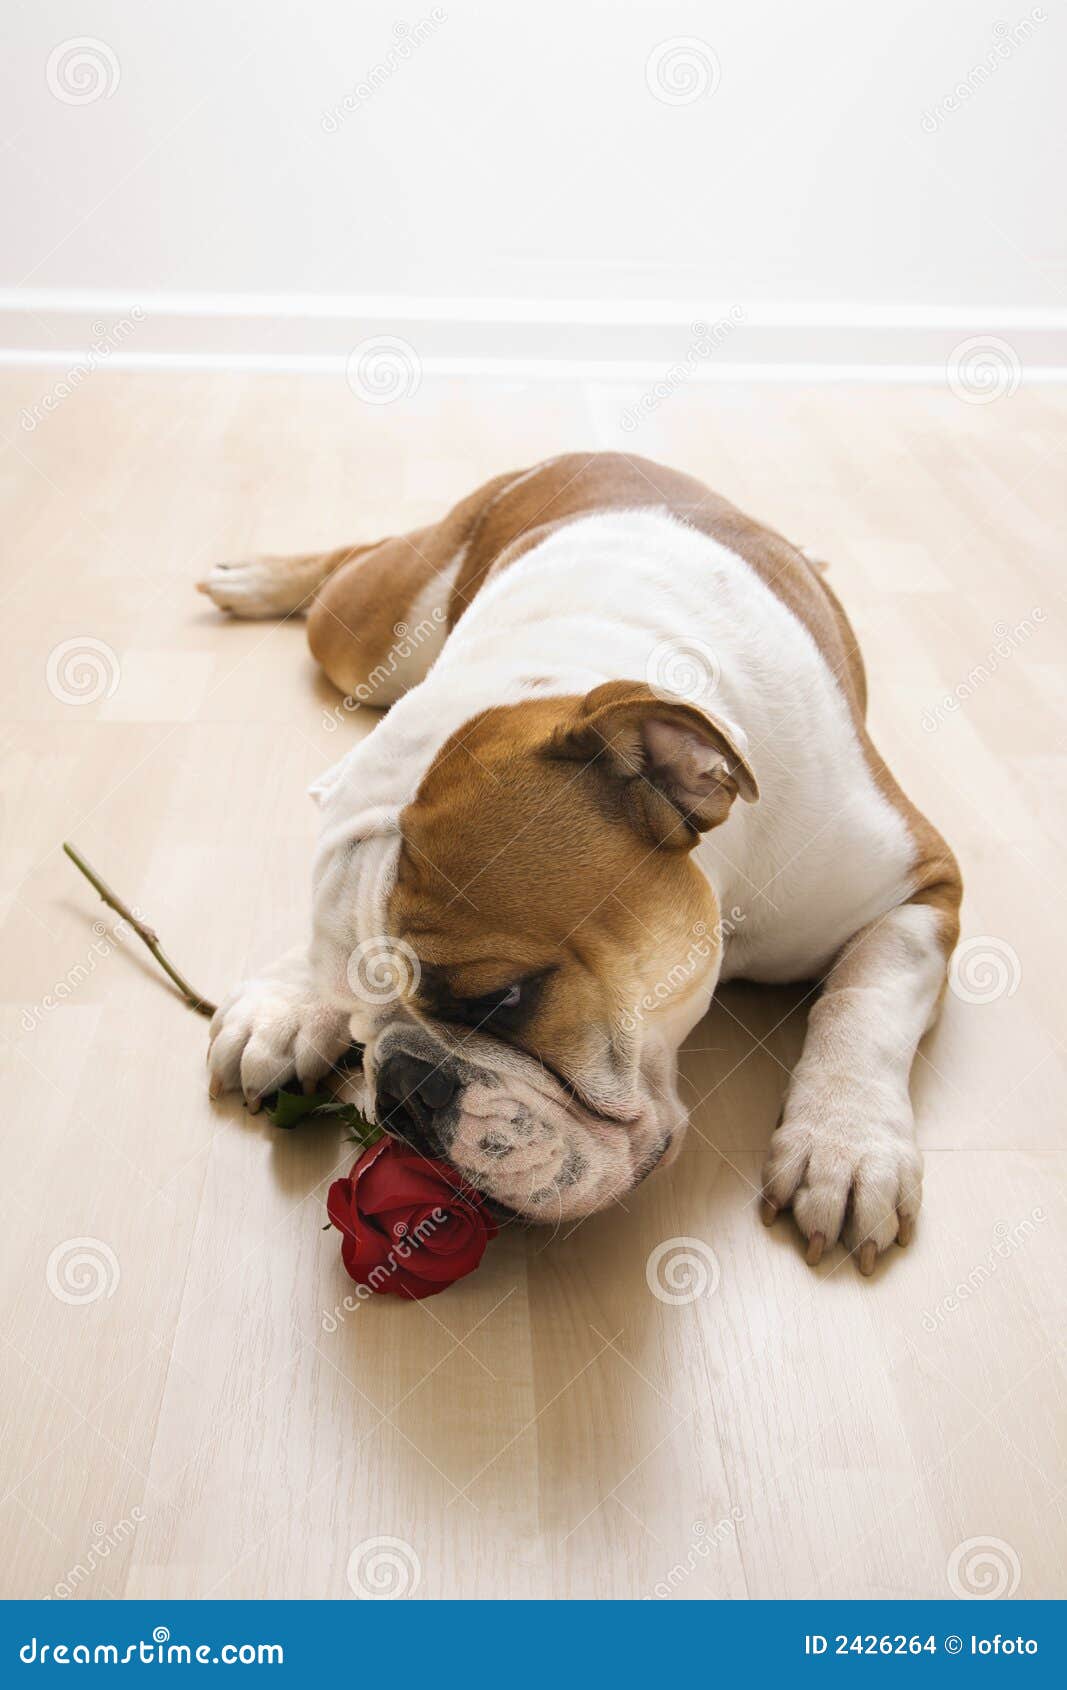 dog sniffing clipart - photo #46